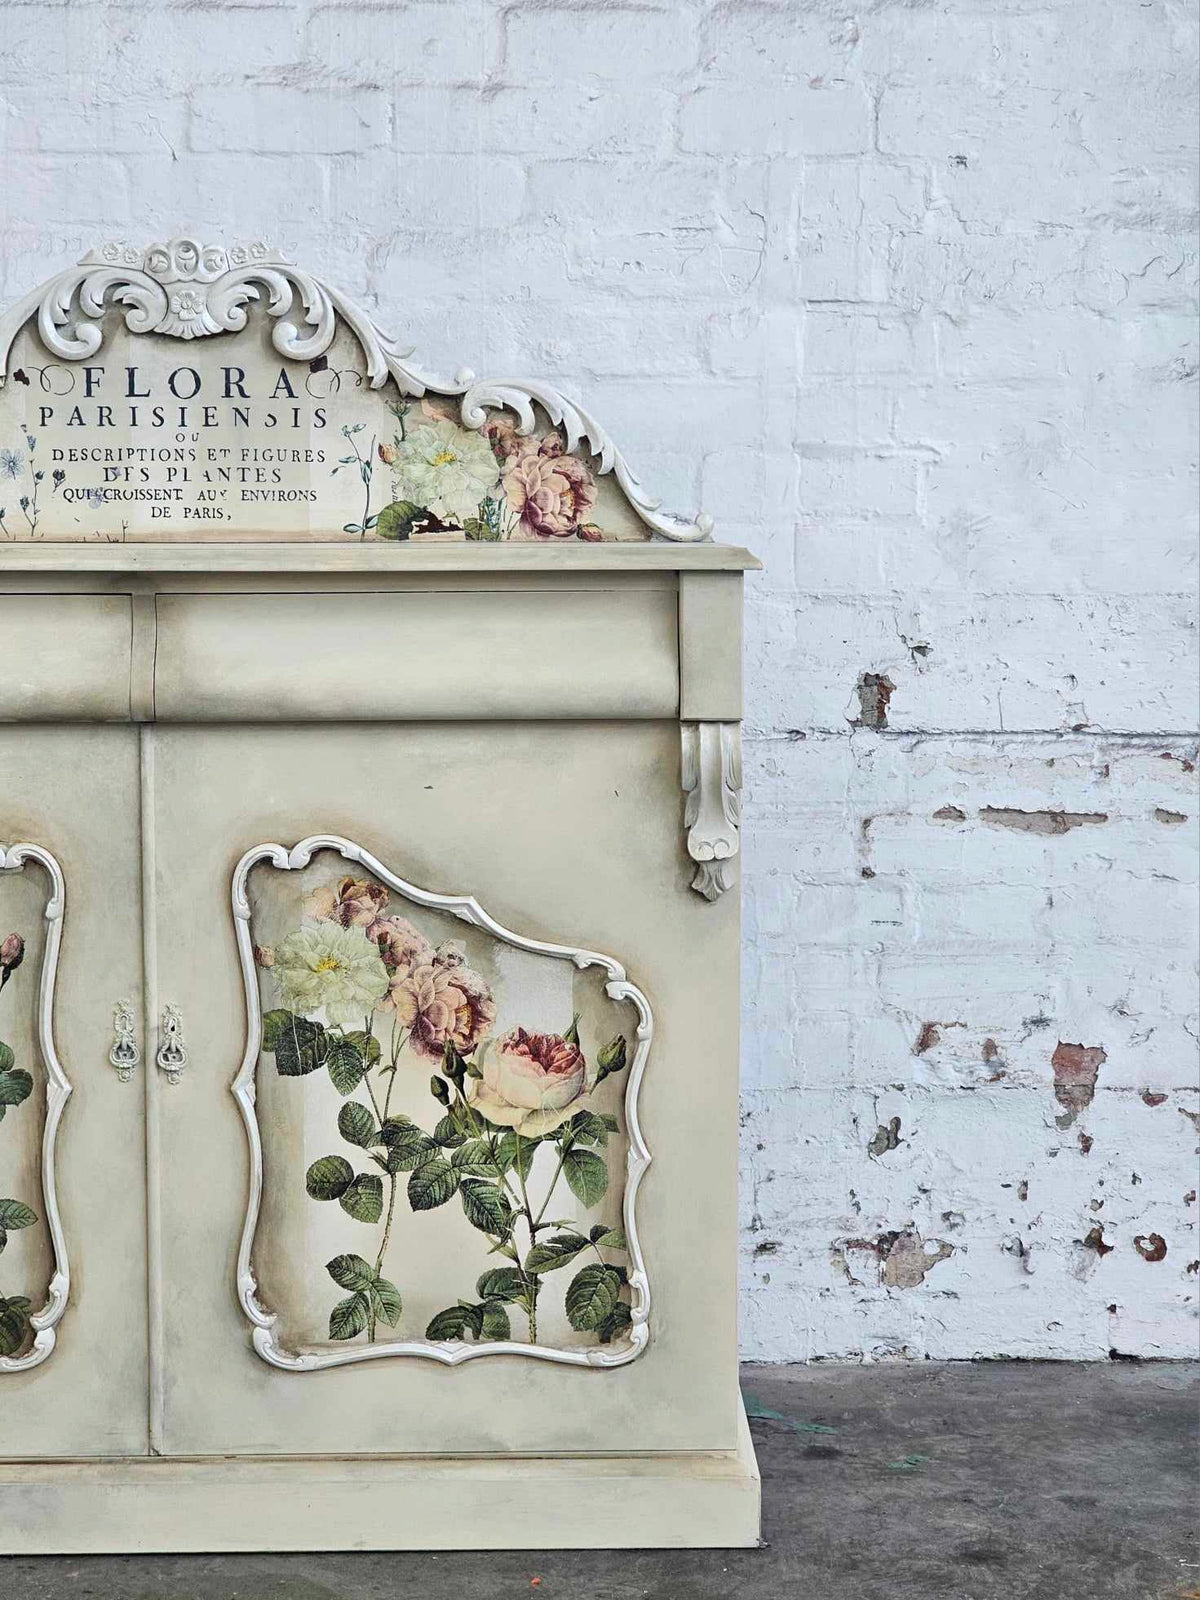 Stunning Chiffonier with floral and script detail - Mint by Michelle furniture